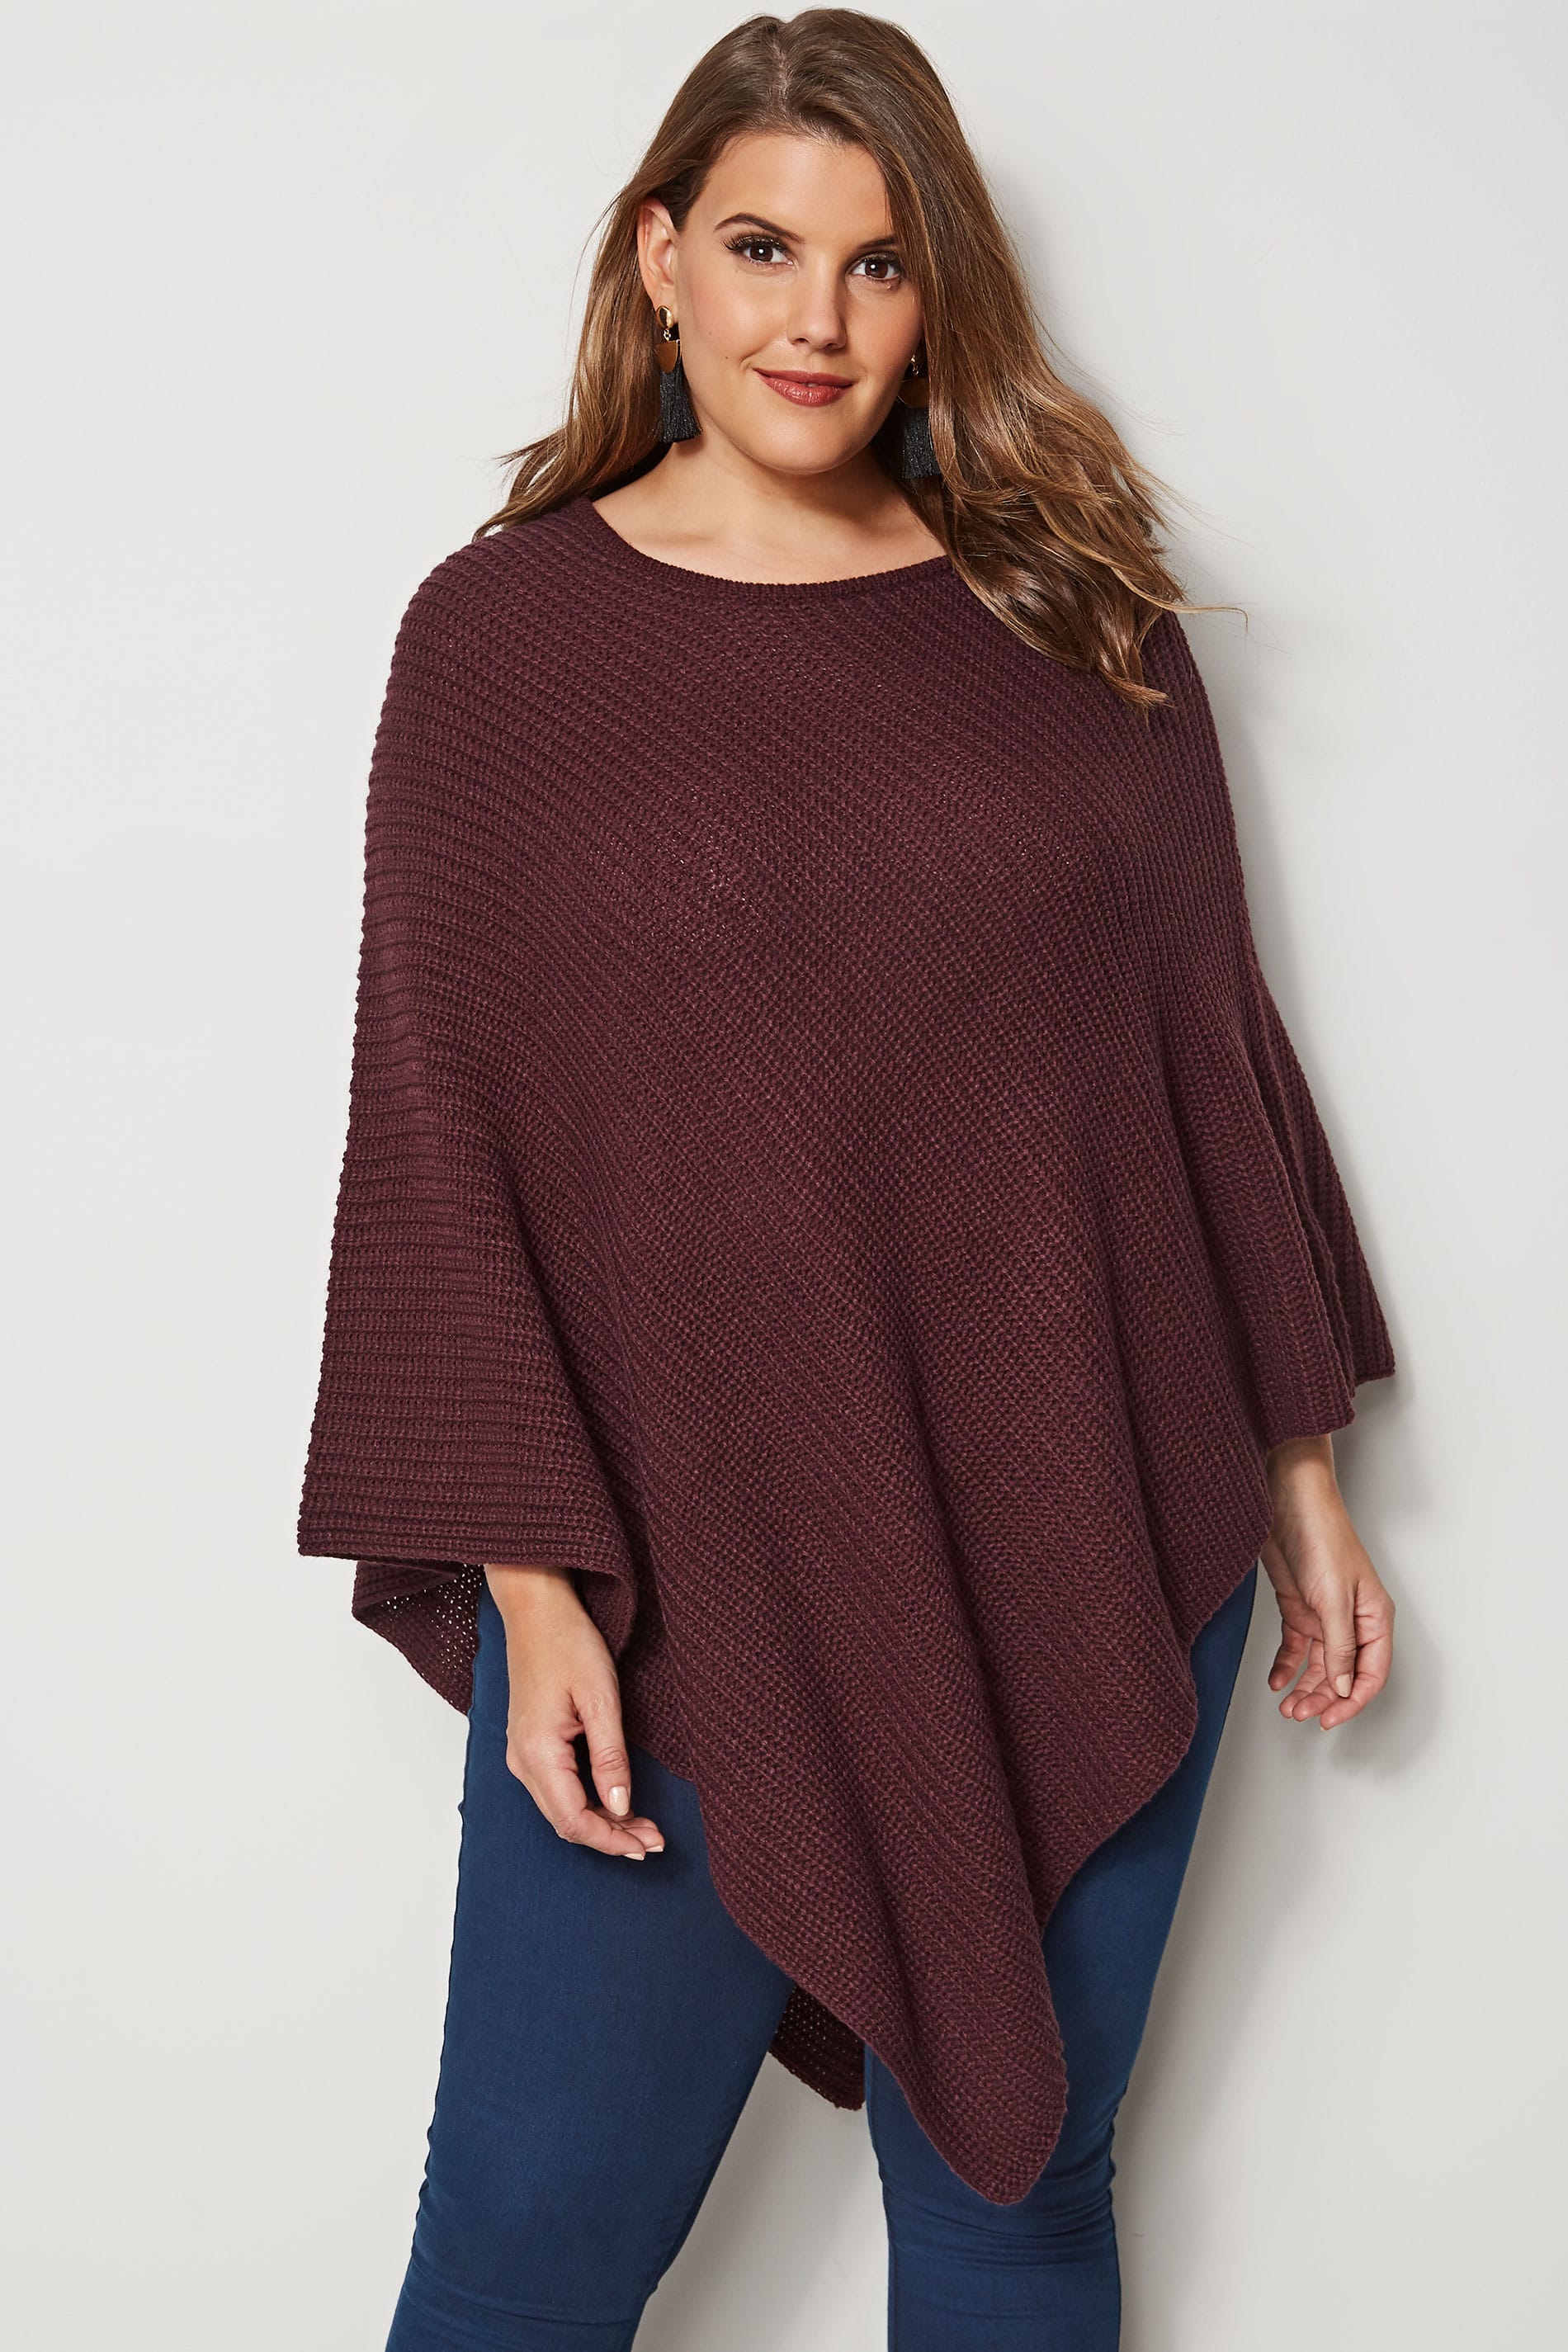 Burgundy Knitted Poncho, plus size 16 to 32